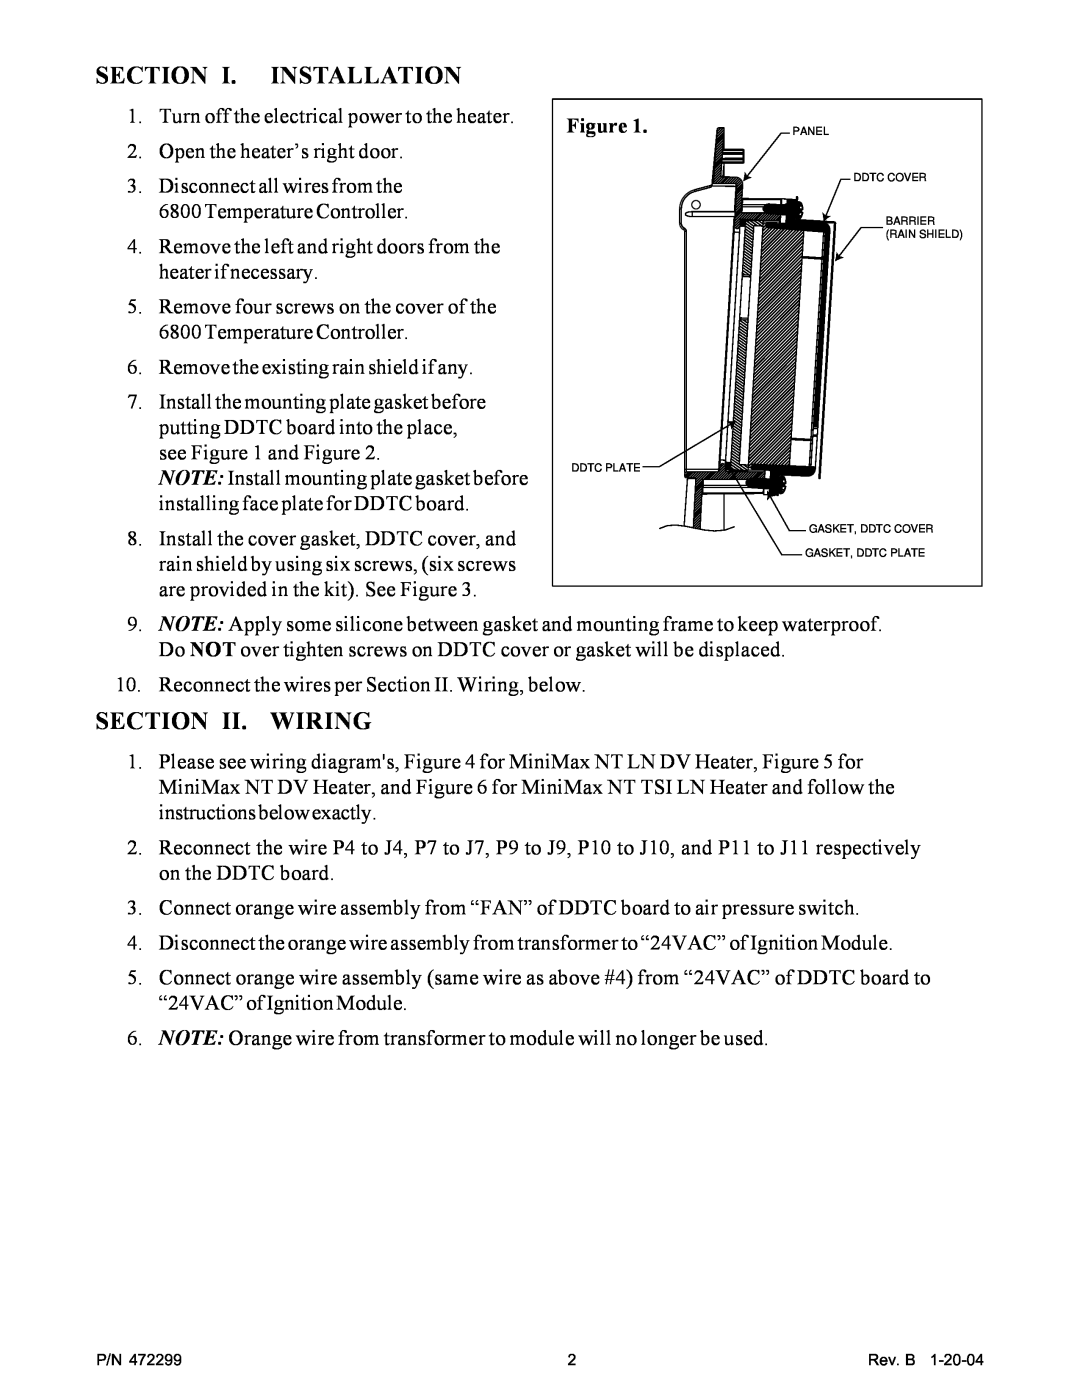 Pentair MiniMax NT Heater important safety instructions Section I. Installation, Section Ii. Wiring 